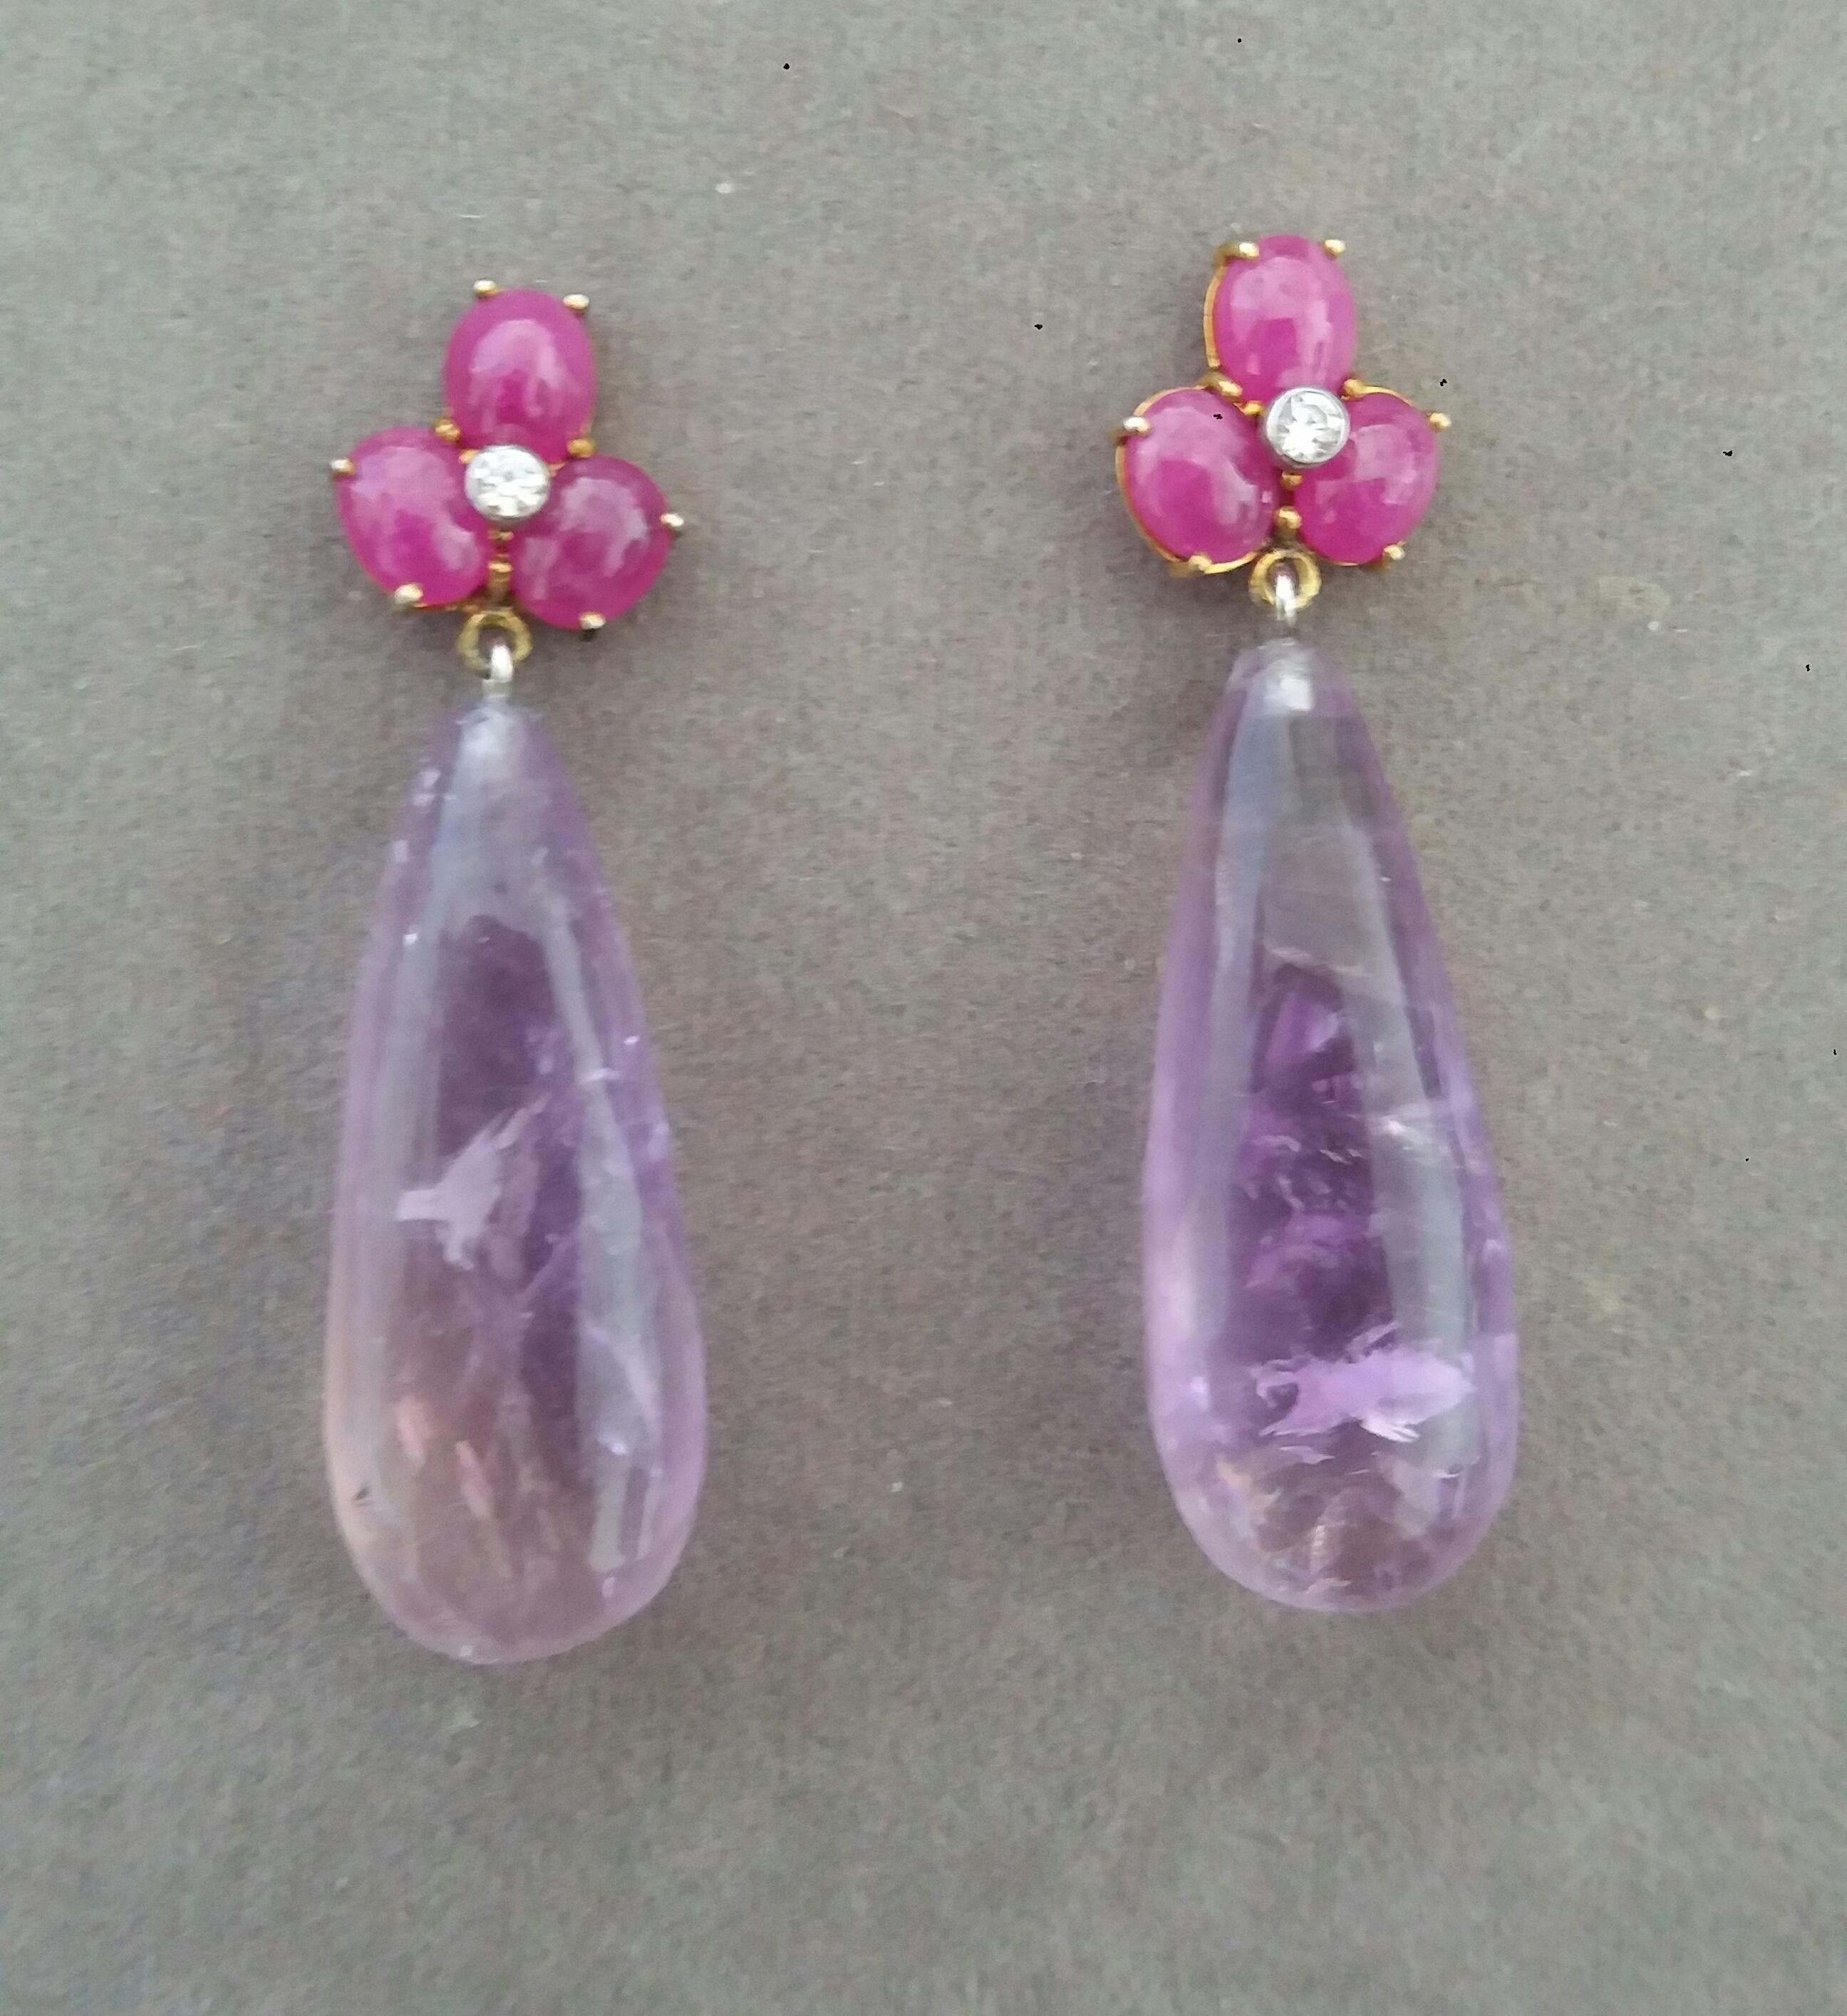 Simple elegant and completely handmade Earrings consisting of an upper part of 3 oval shape Ruby cabs of 4 mm x 5 mm set together in 14 Kt yellow gold with 2 small diamonds in the center, at the bottom 2 Round Drop Amethyst measuring 12 mm x 30